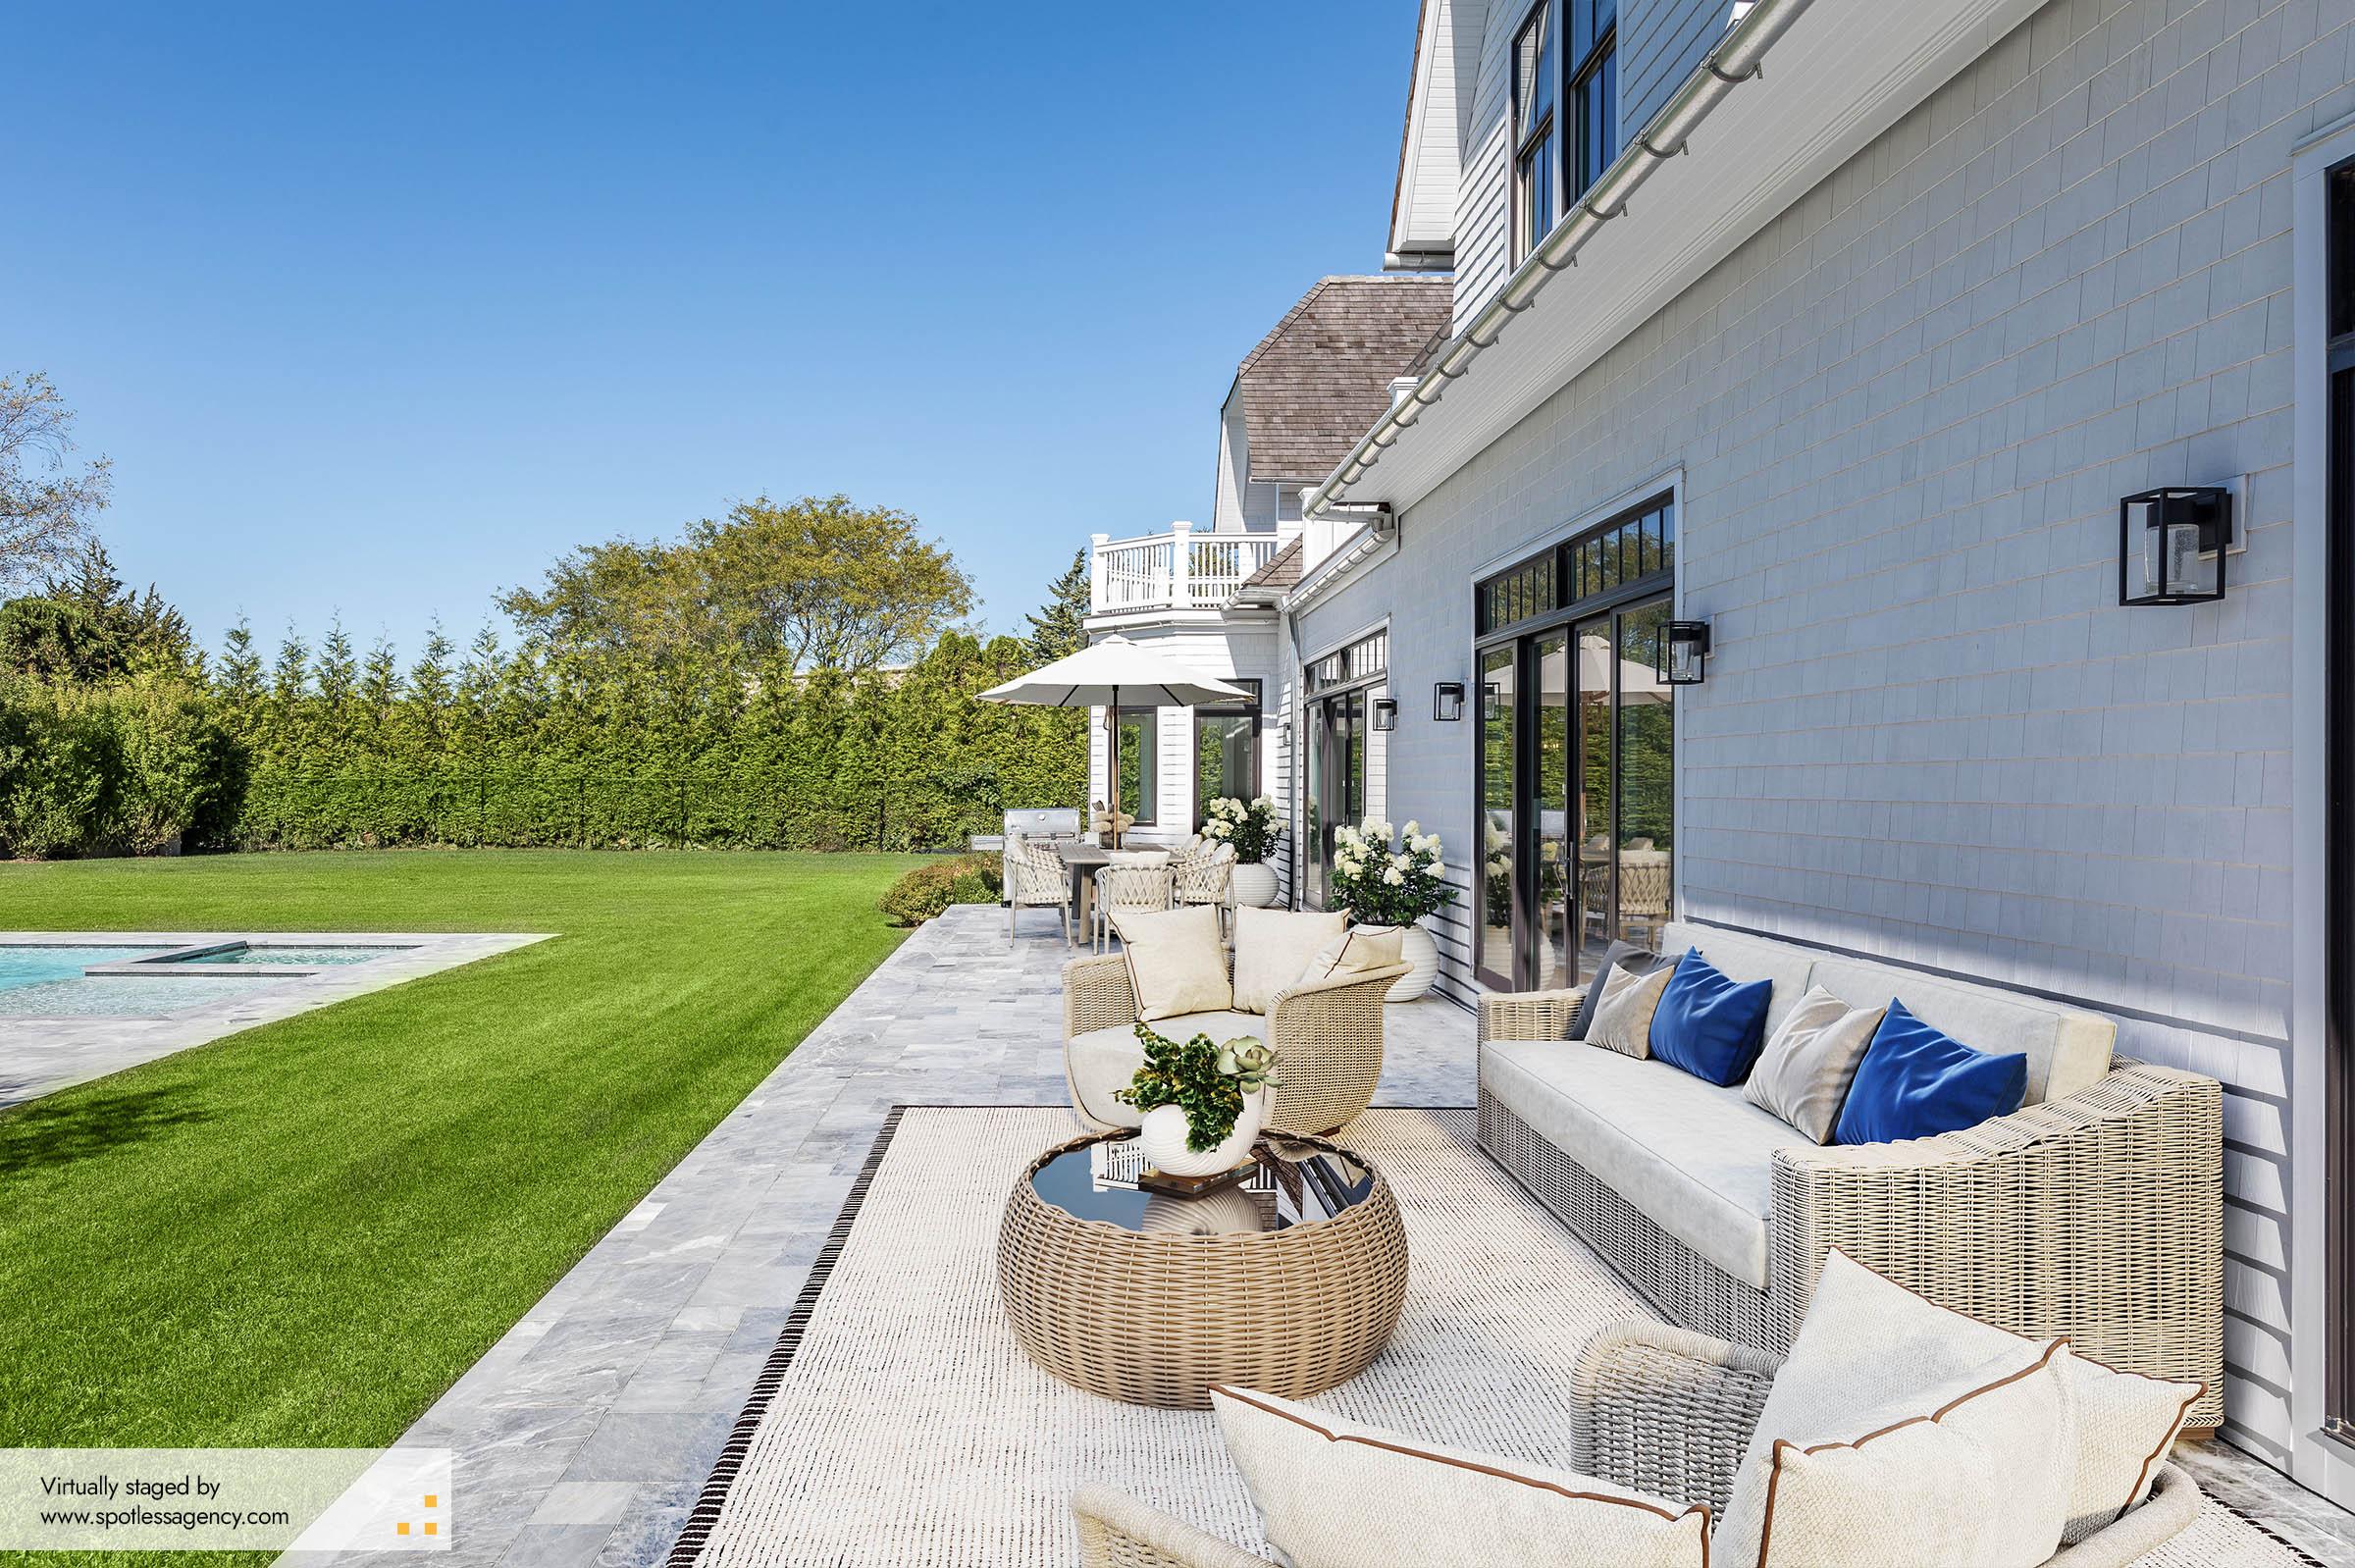 Terrace Virtual Staging